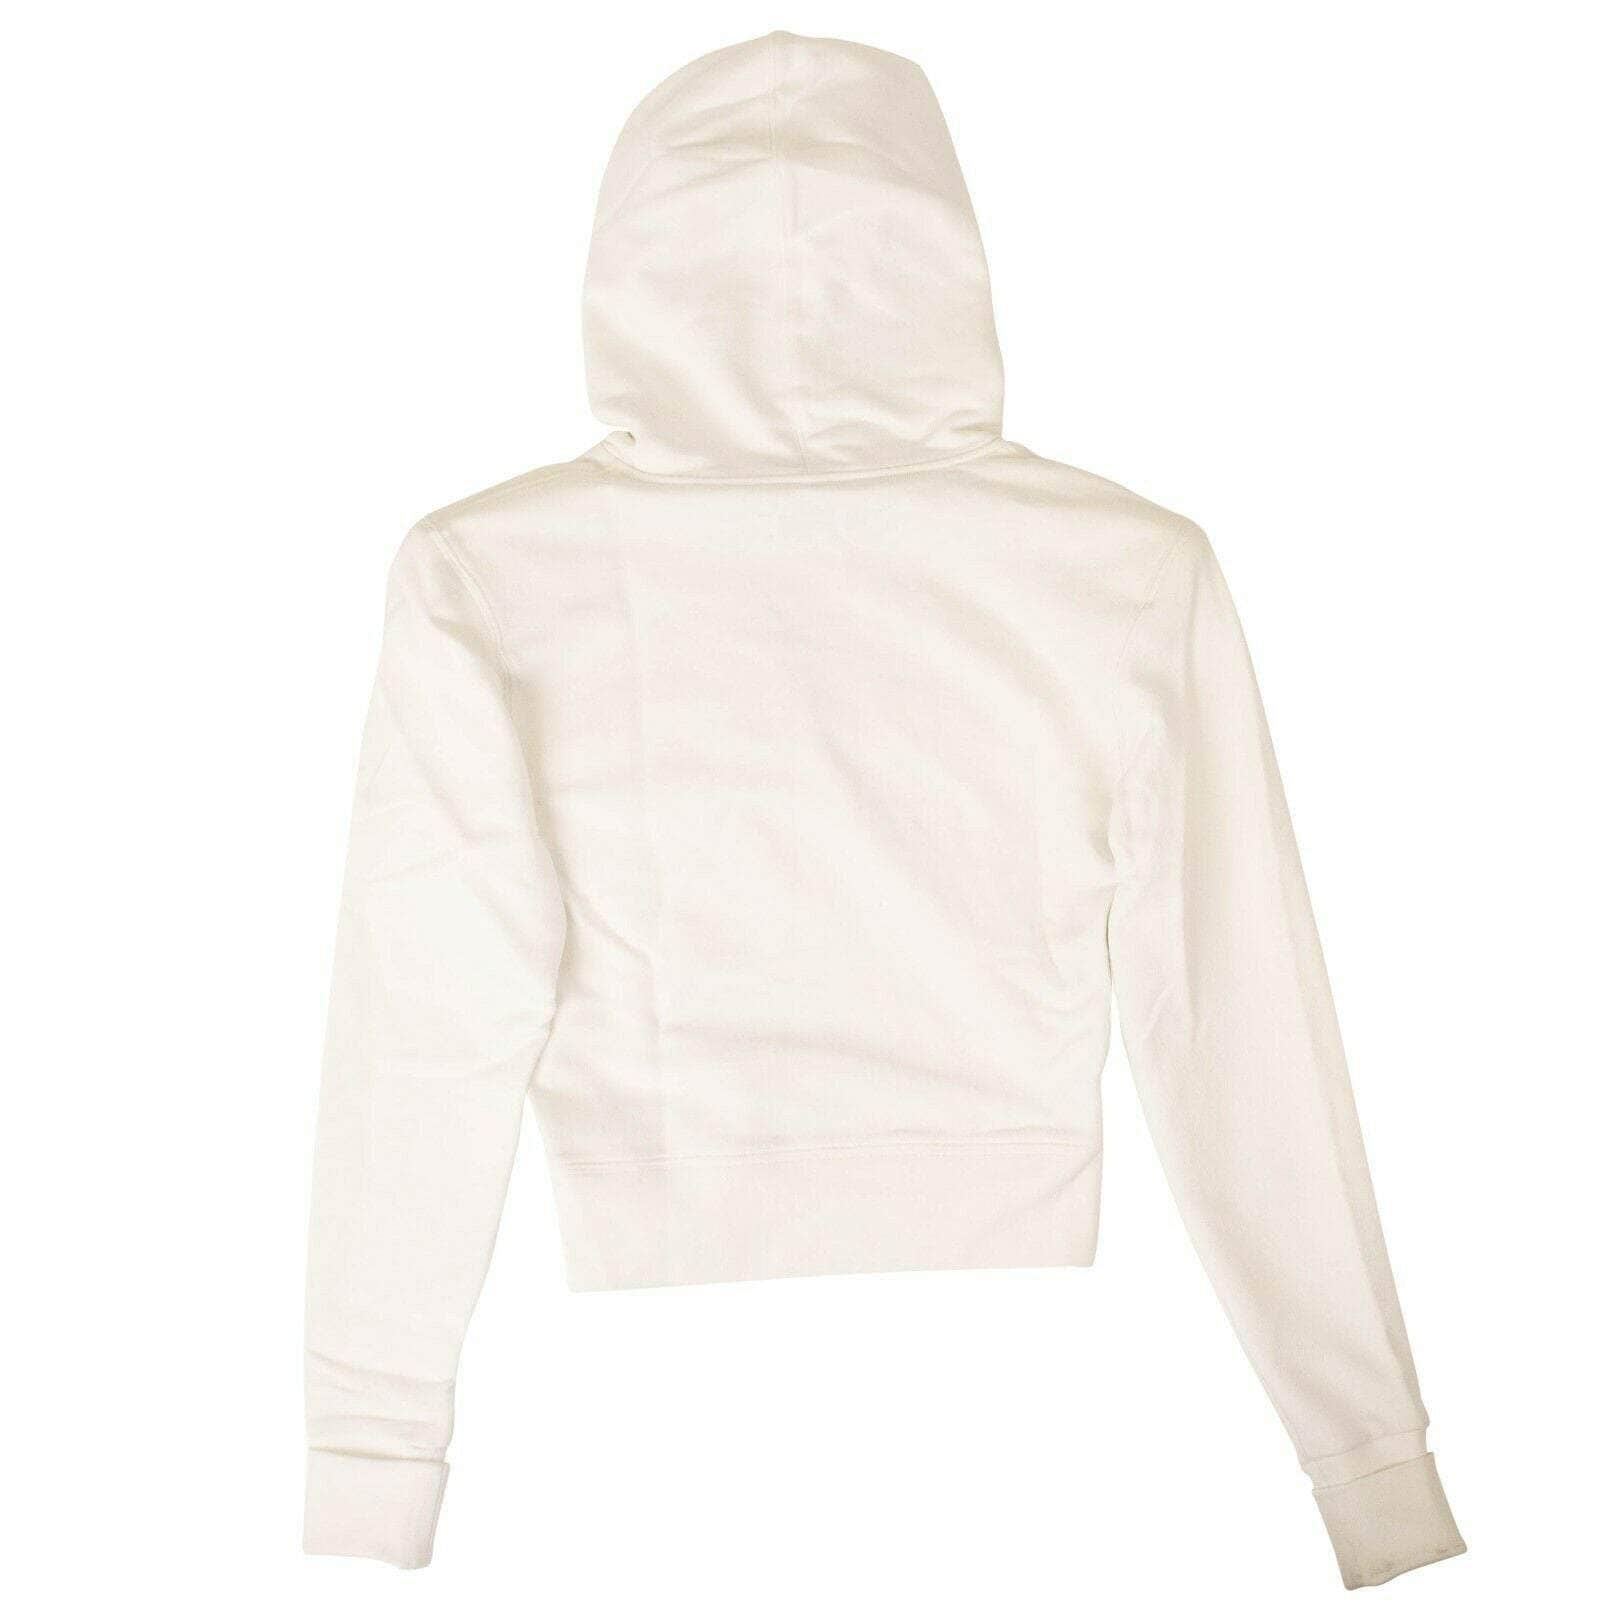 A_PLAN_APPLICATION a_plan_application, channelenable-all, couponcollection, gender-womens, main-clothing, size-s, under-250, womens-hoodies-sweatshirts S White Judo Cropped Hoodie 82NGG-AP-1009/S 82NGG-AP-1009/S